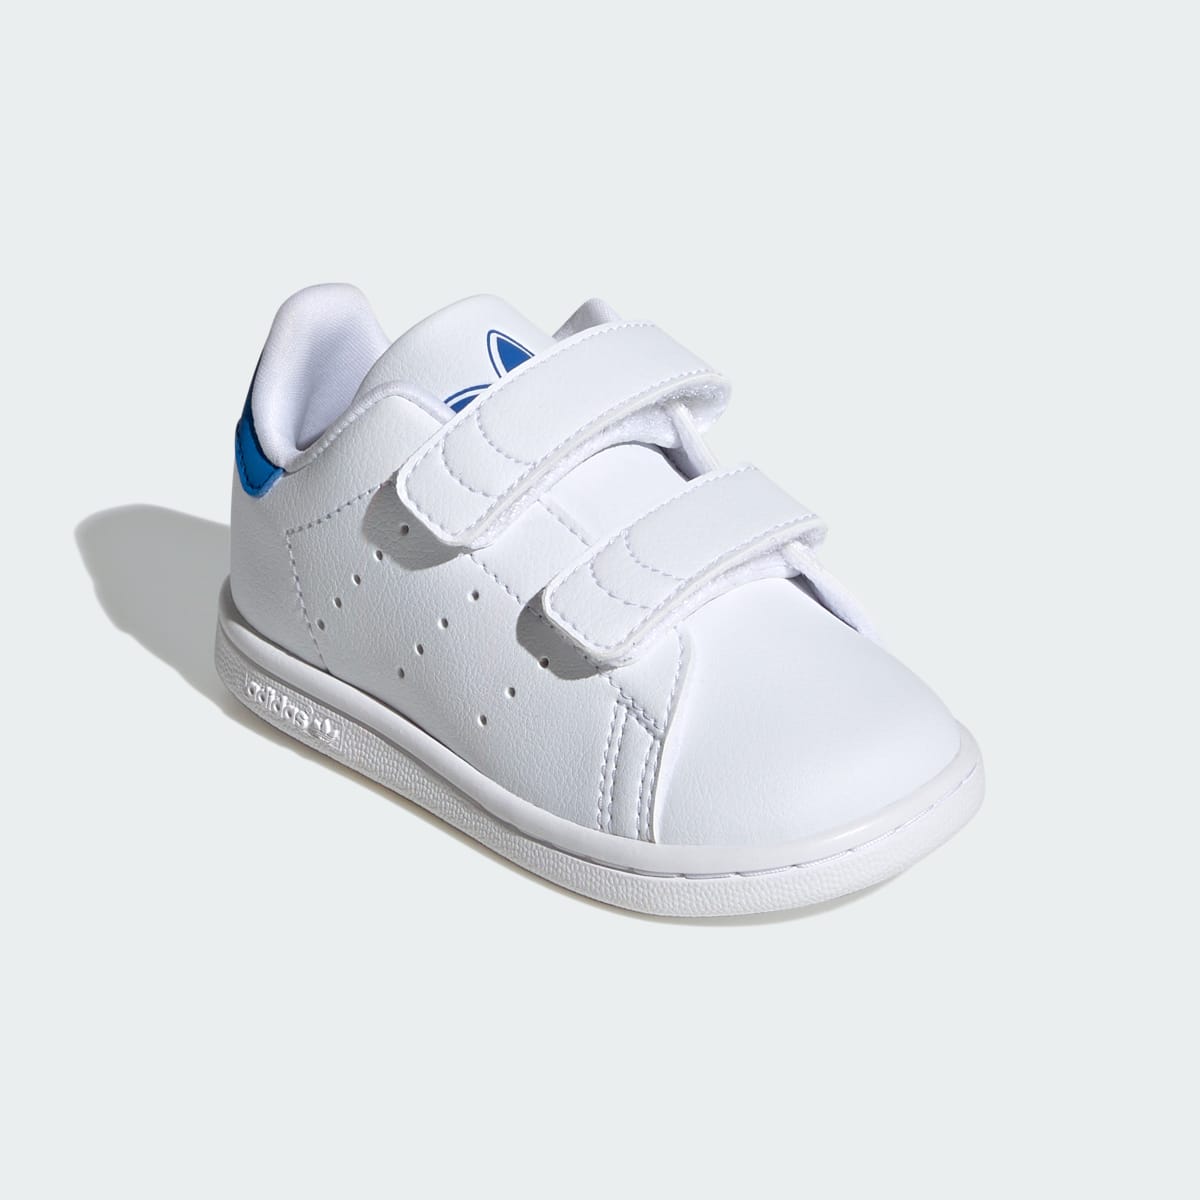 Adidas Stan Smith Comfort Closure Shoes Kids. 5